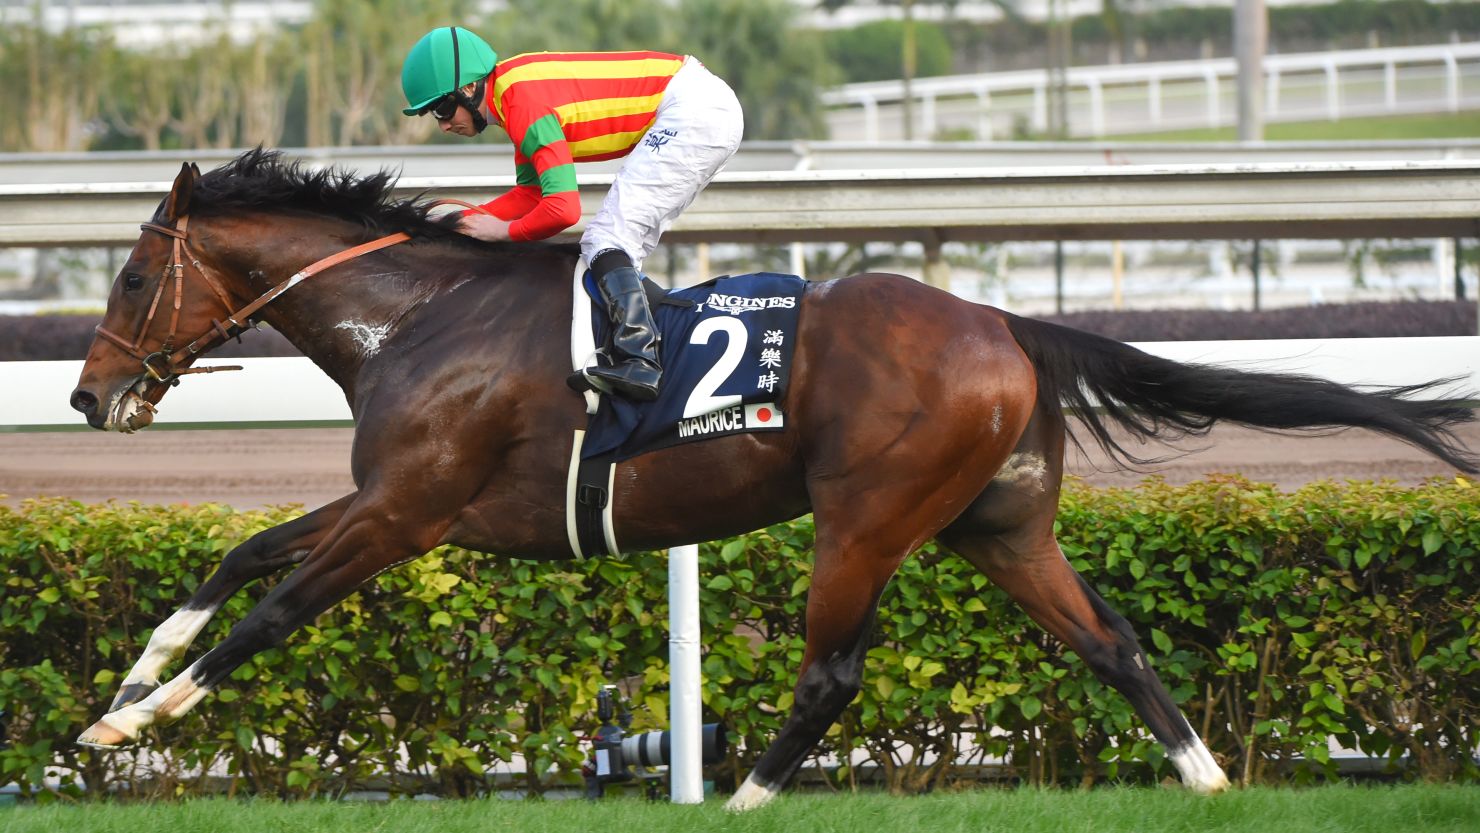 Ryan Moore rides Maurice to victory in the Longines Hong Kong Cup at Sha Tin Racecourse.